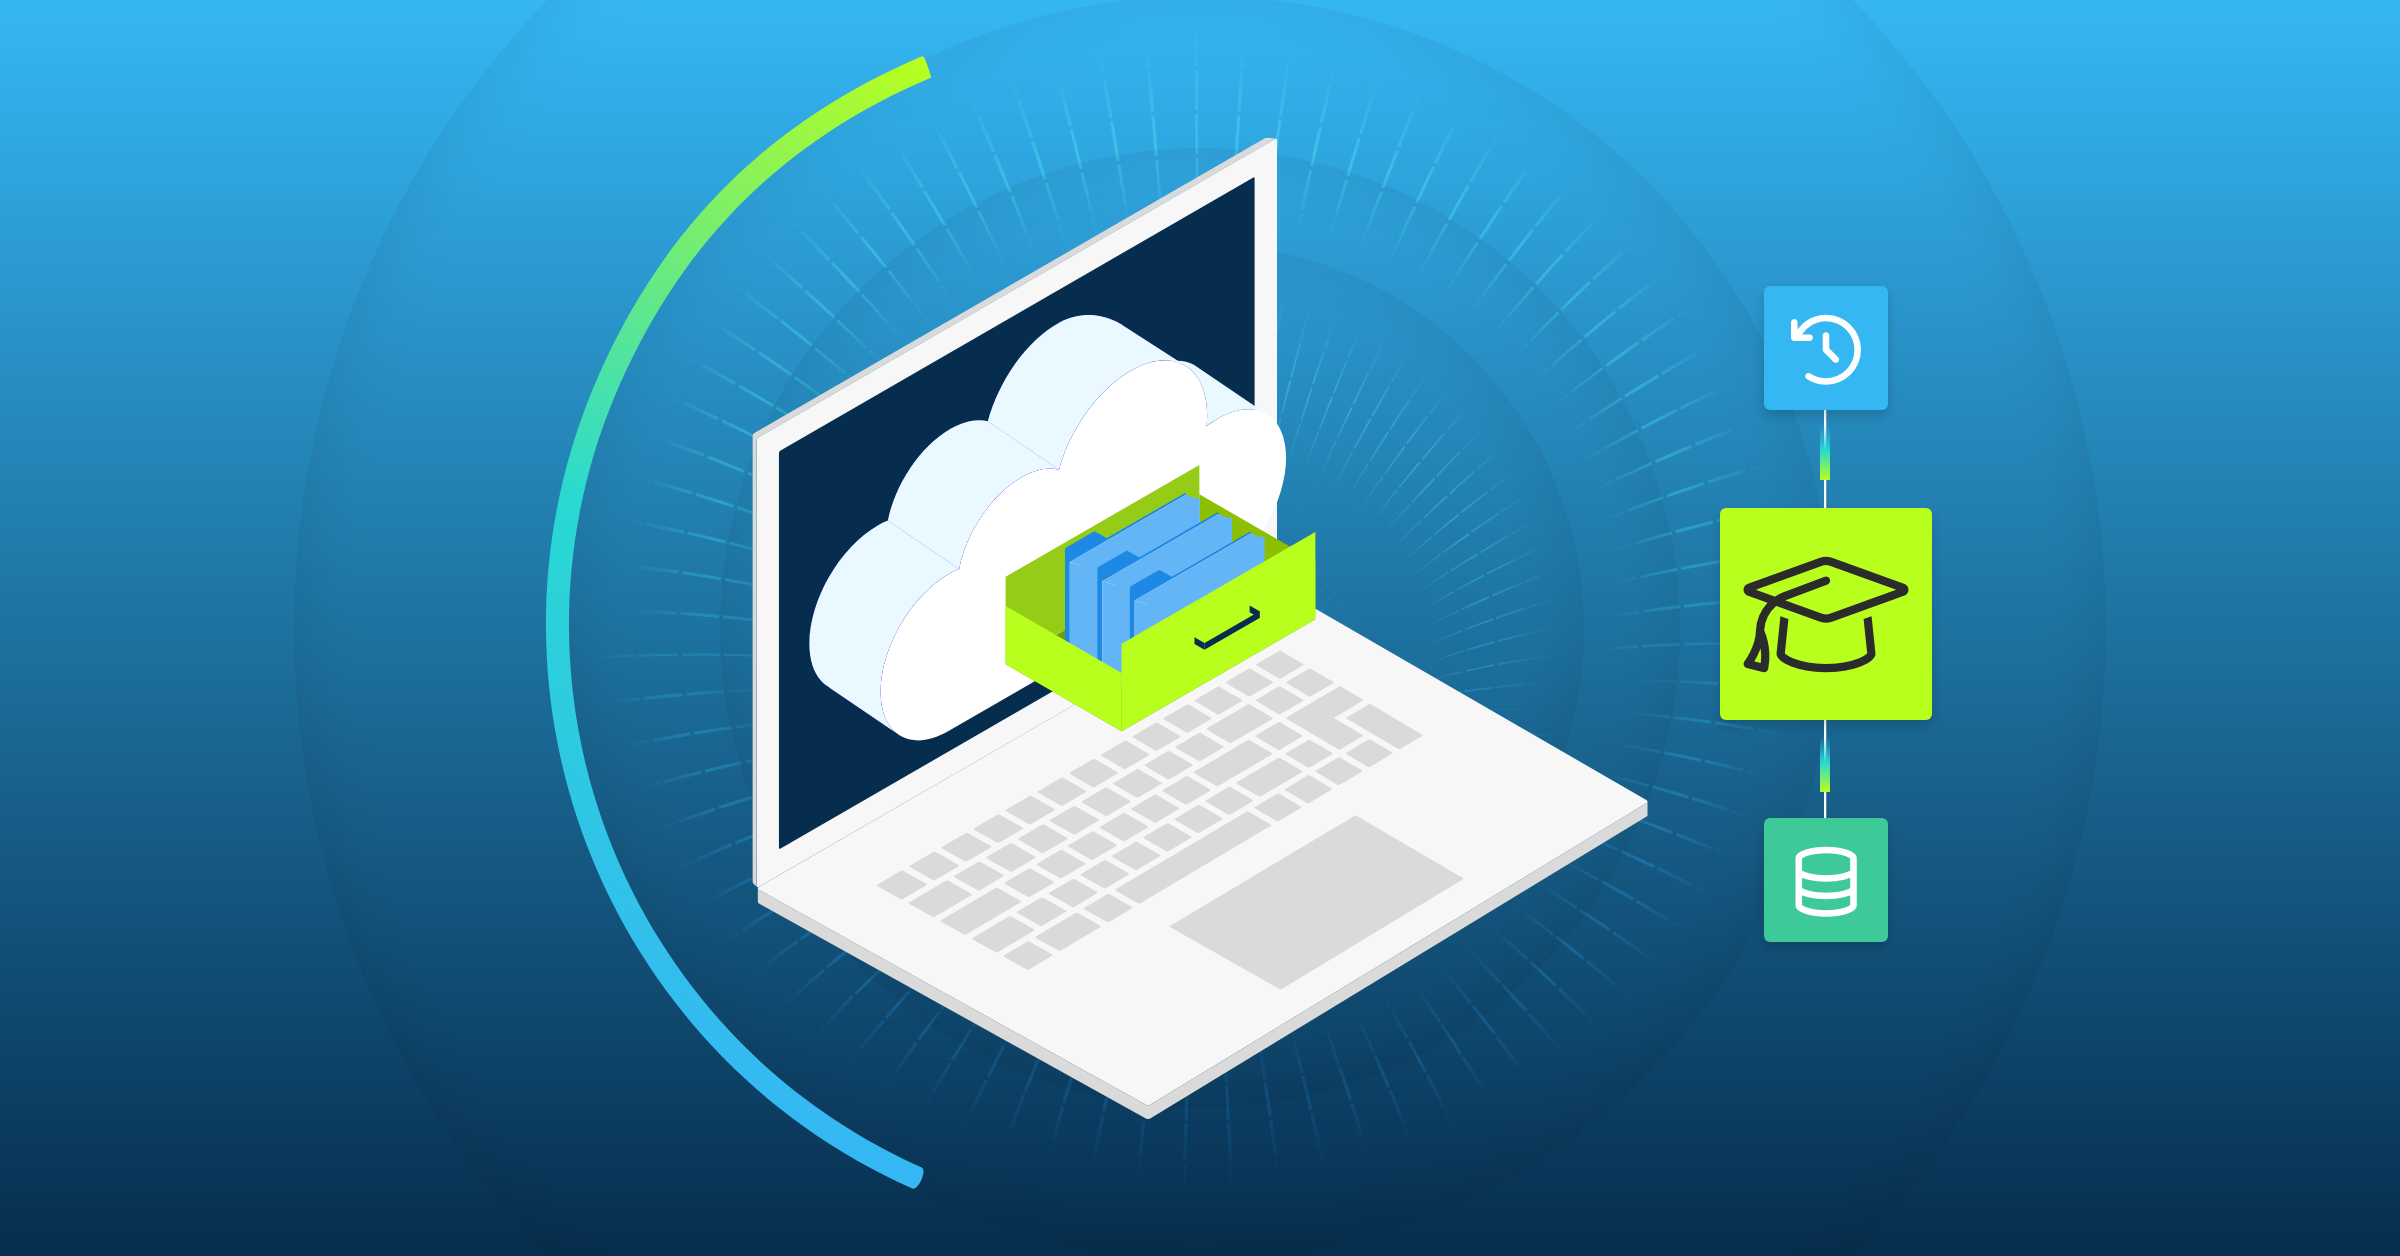 Laptop graphic with cloud storage and educational icons, illustrating university data backup methods for an educational blog.